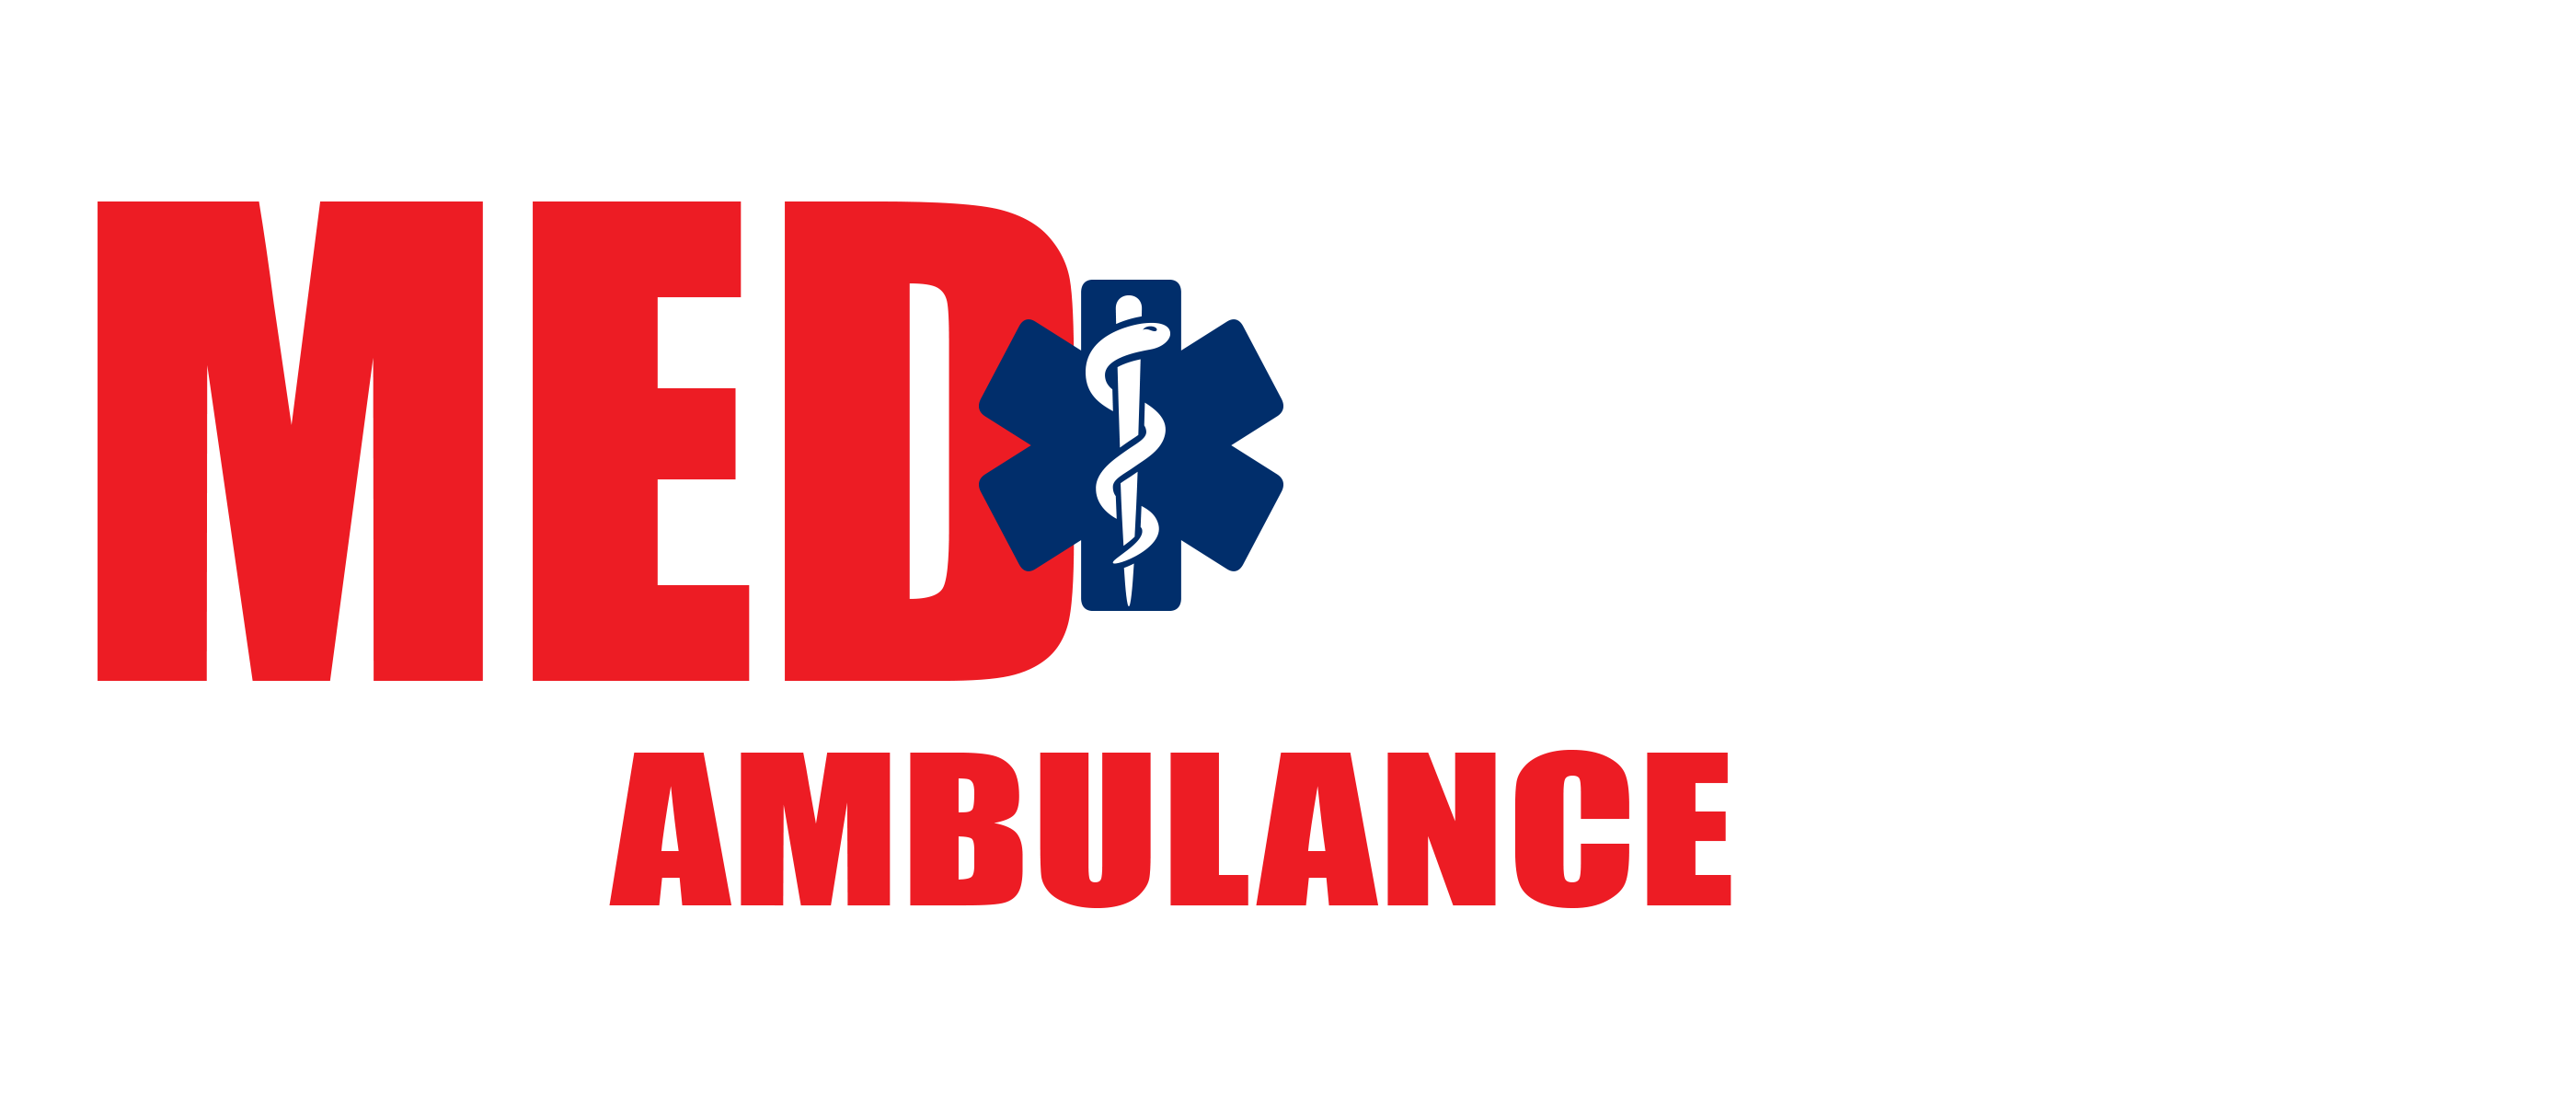 The logo of medtrek ambulance in red and white with transparent background